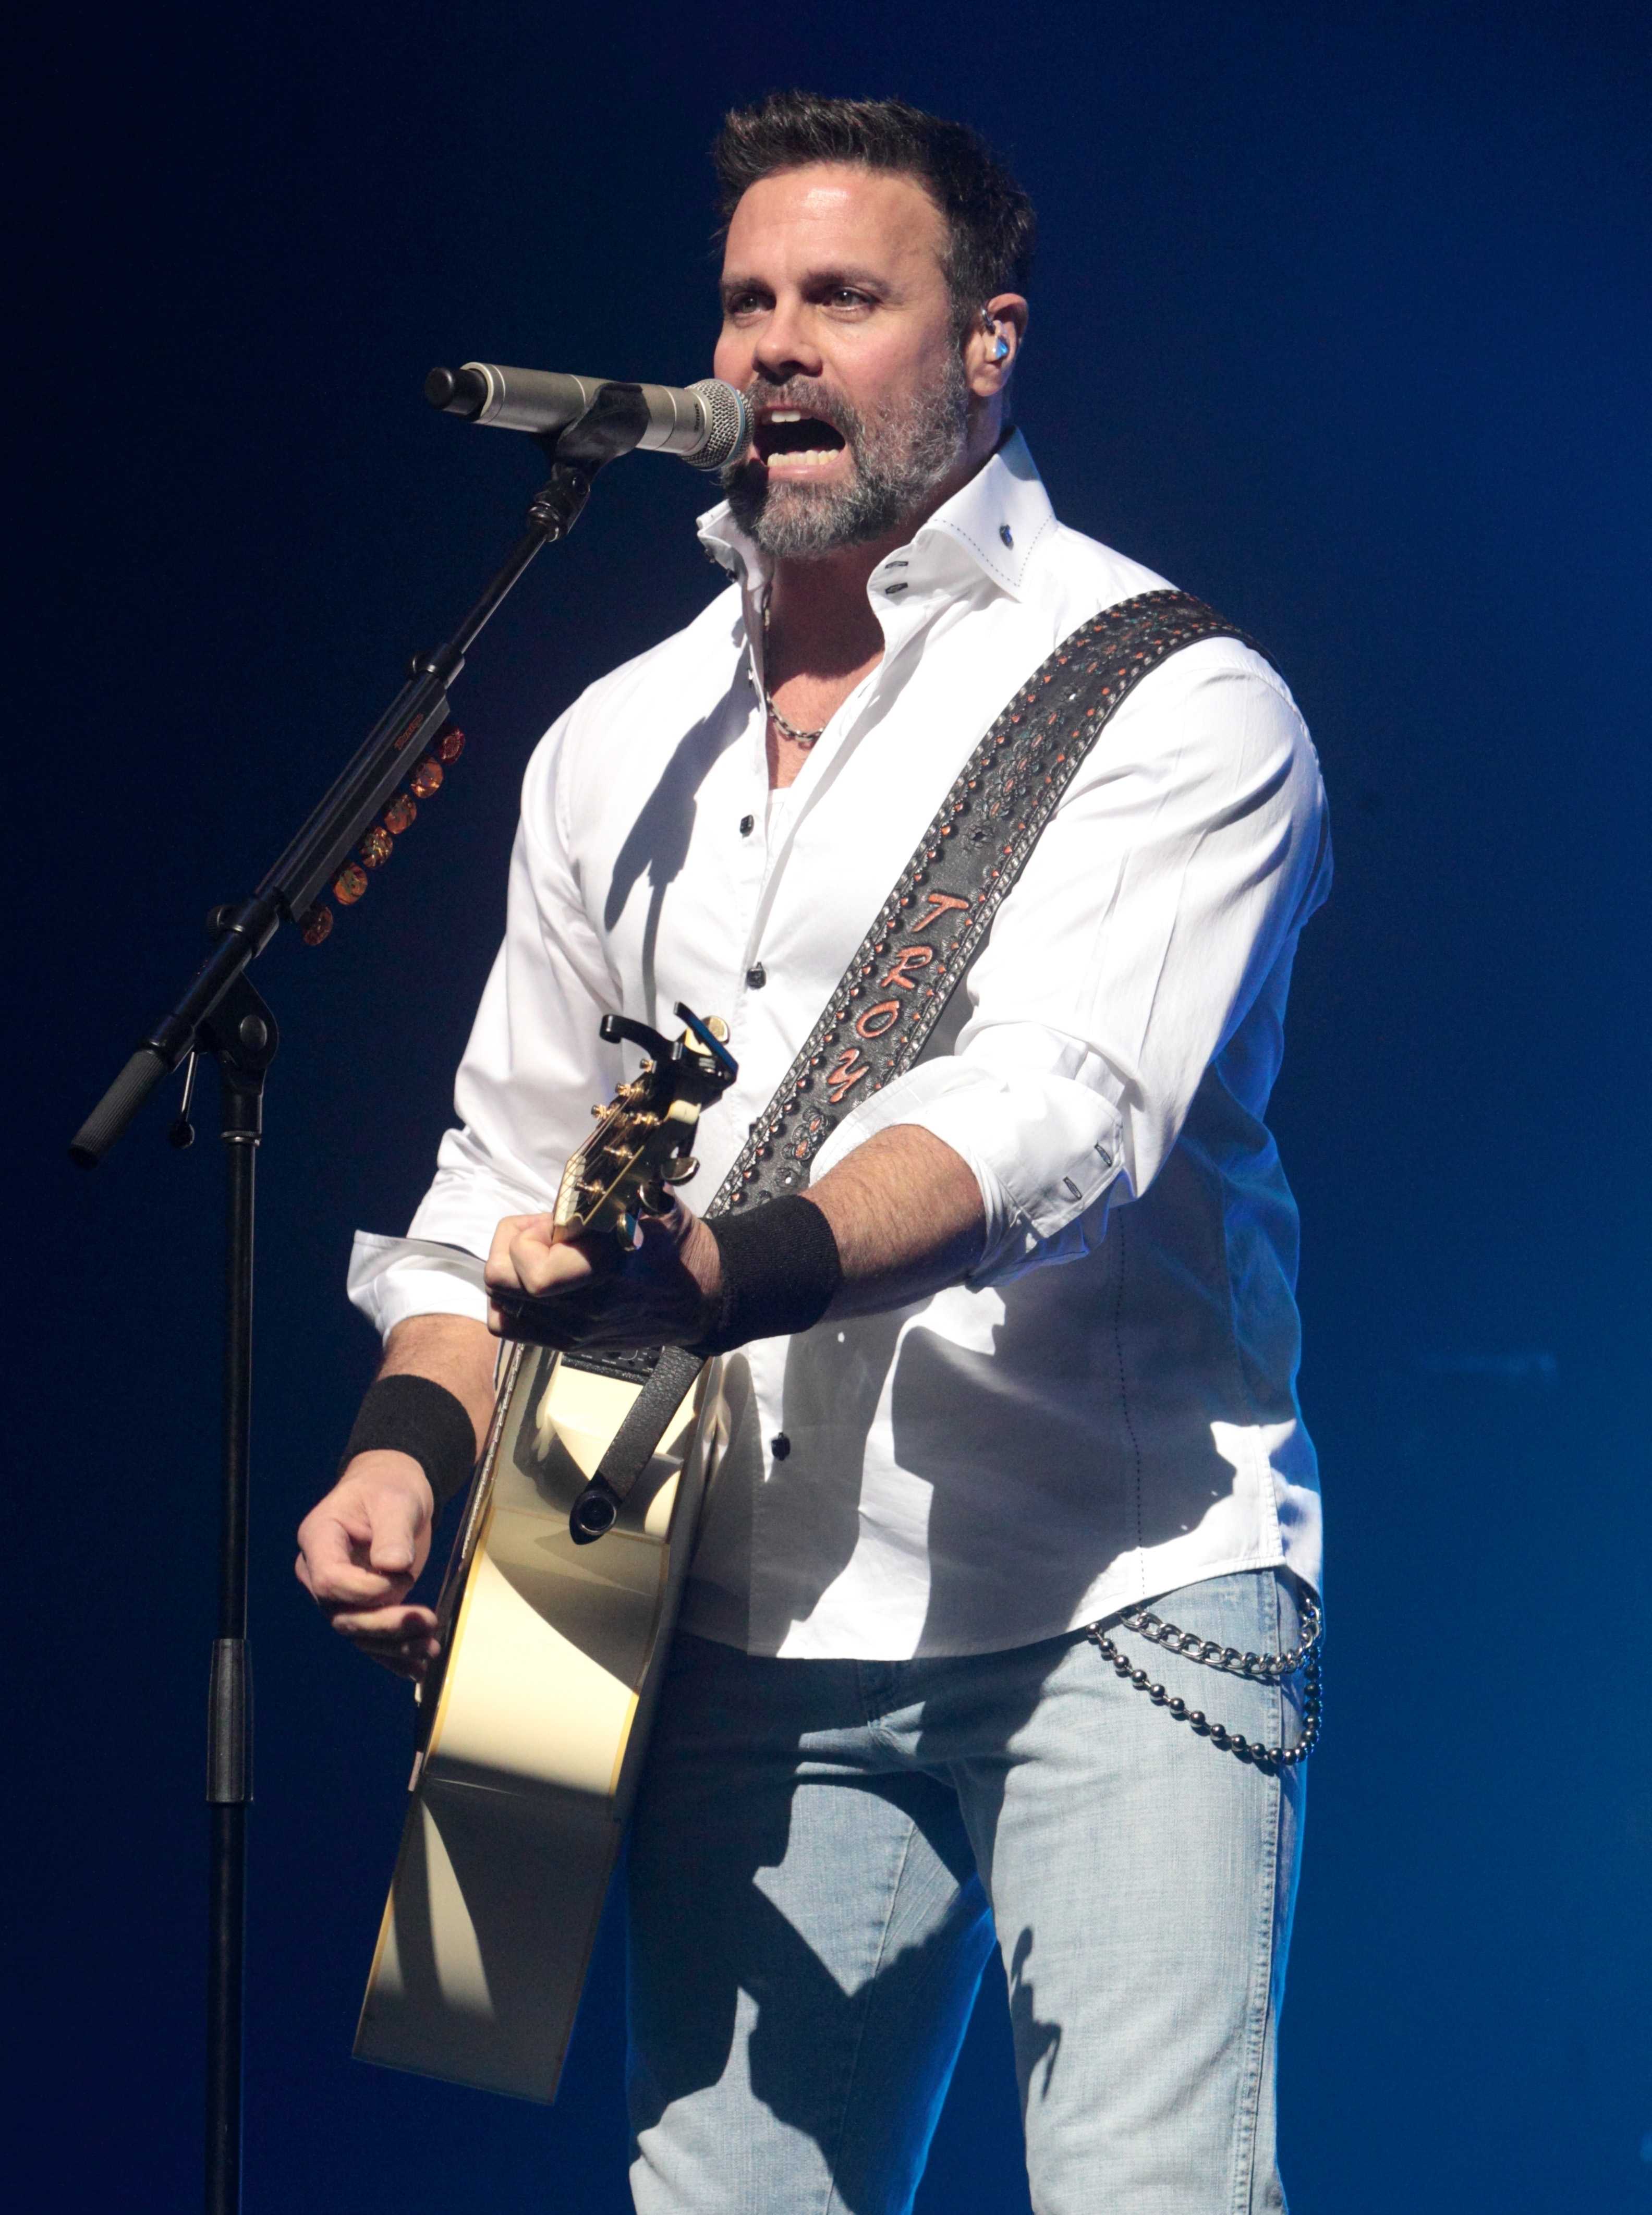 New details have emerged around the shocking death of country star Troy Gentry